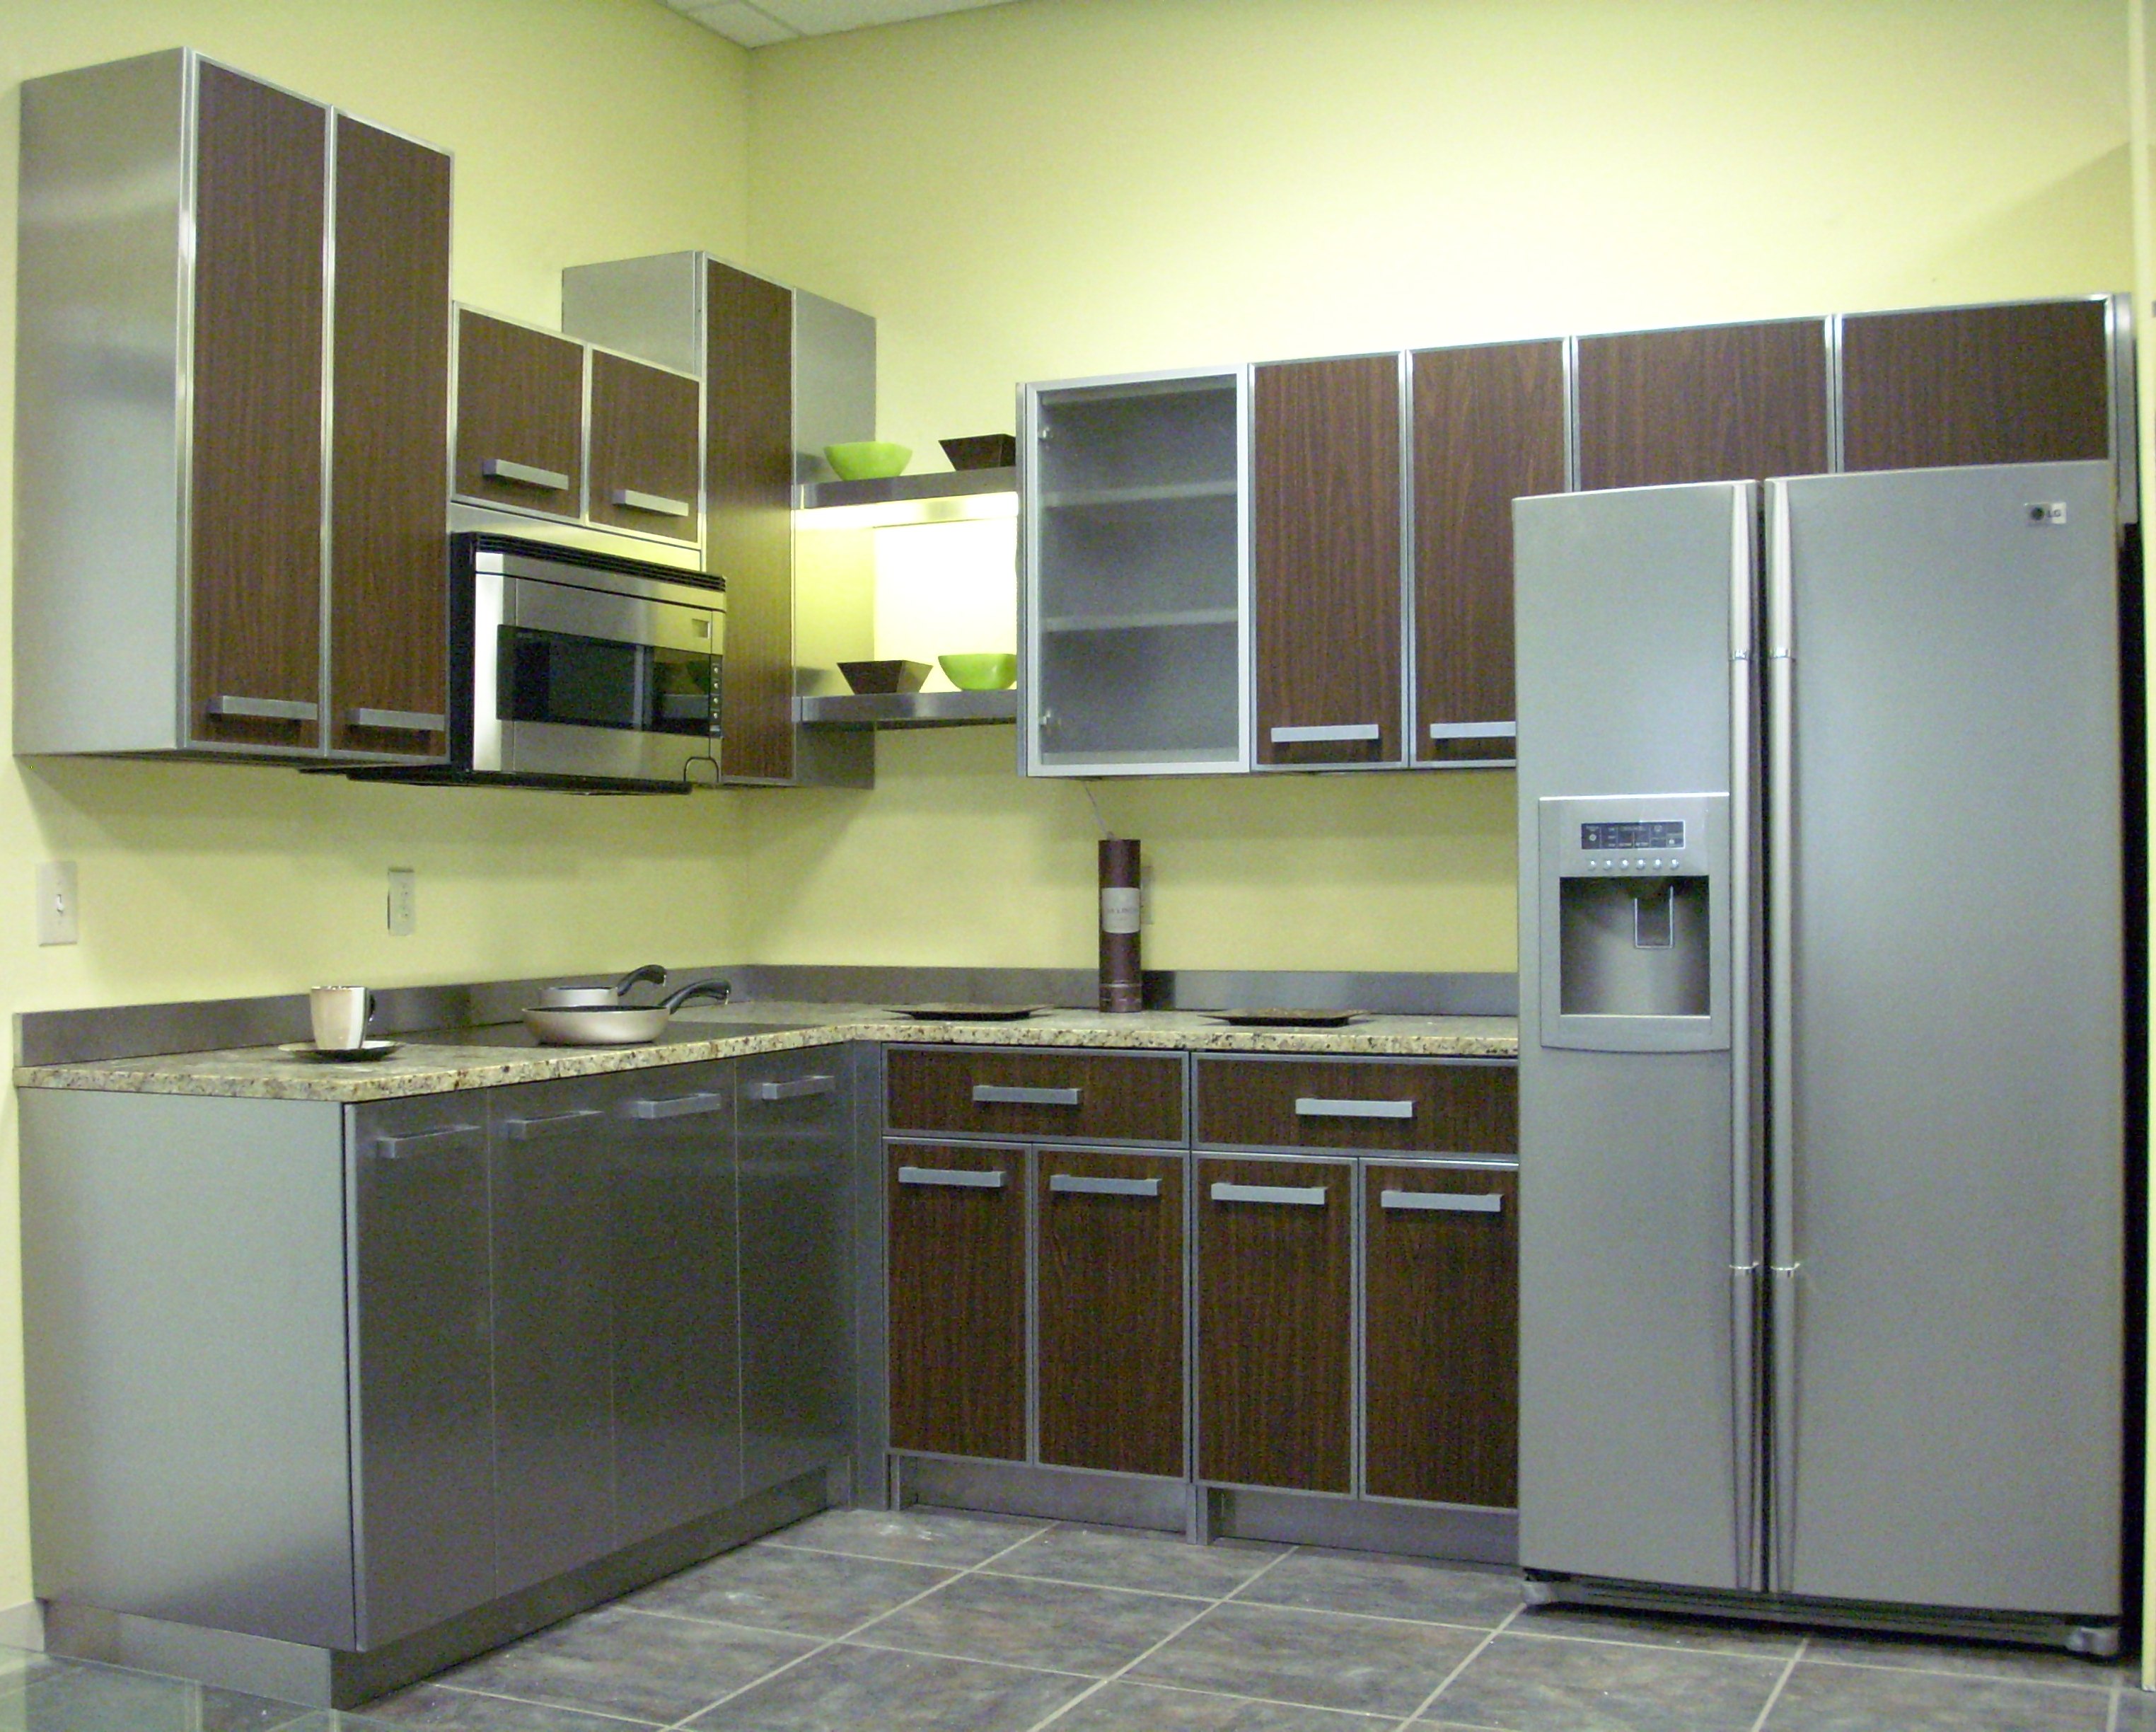 Stainless Steel Family Kitchen Cabinet Unit China Mainland Kitchen Stainless Steel Kitchen Cabinets